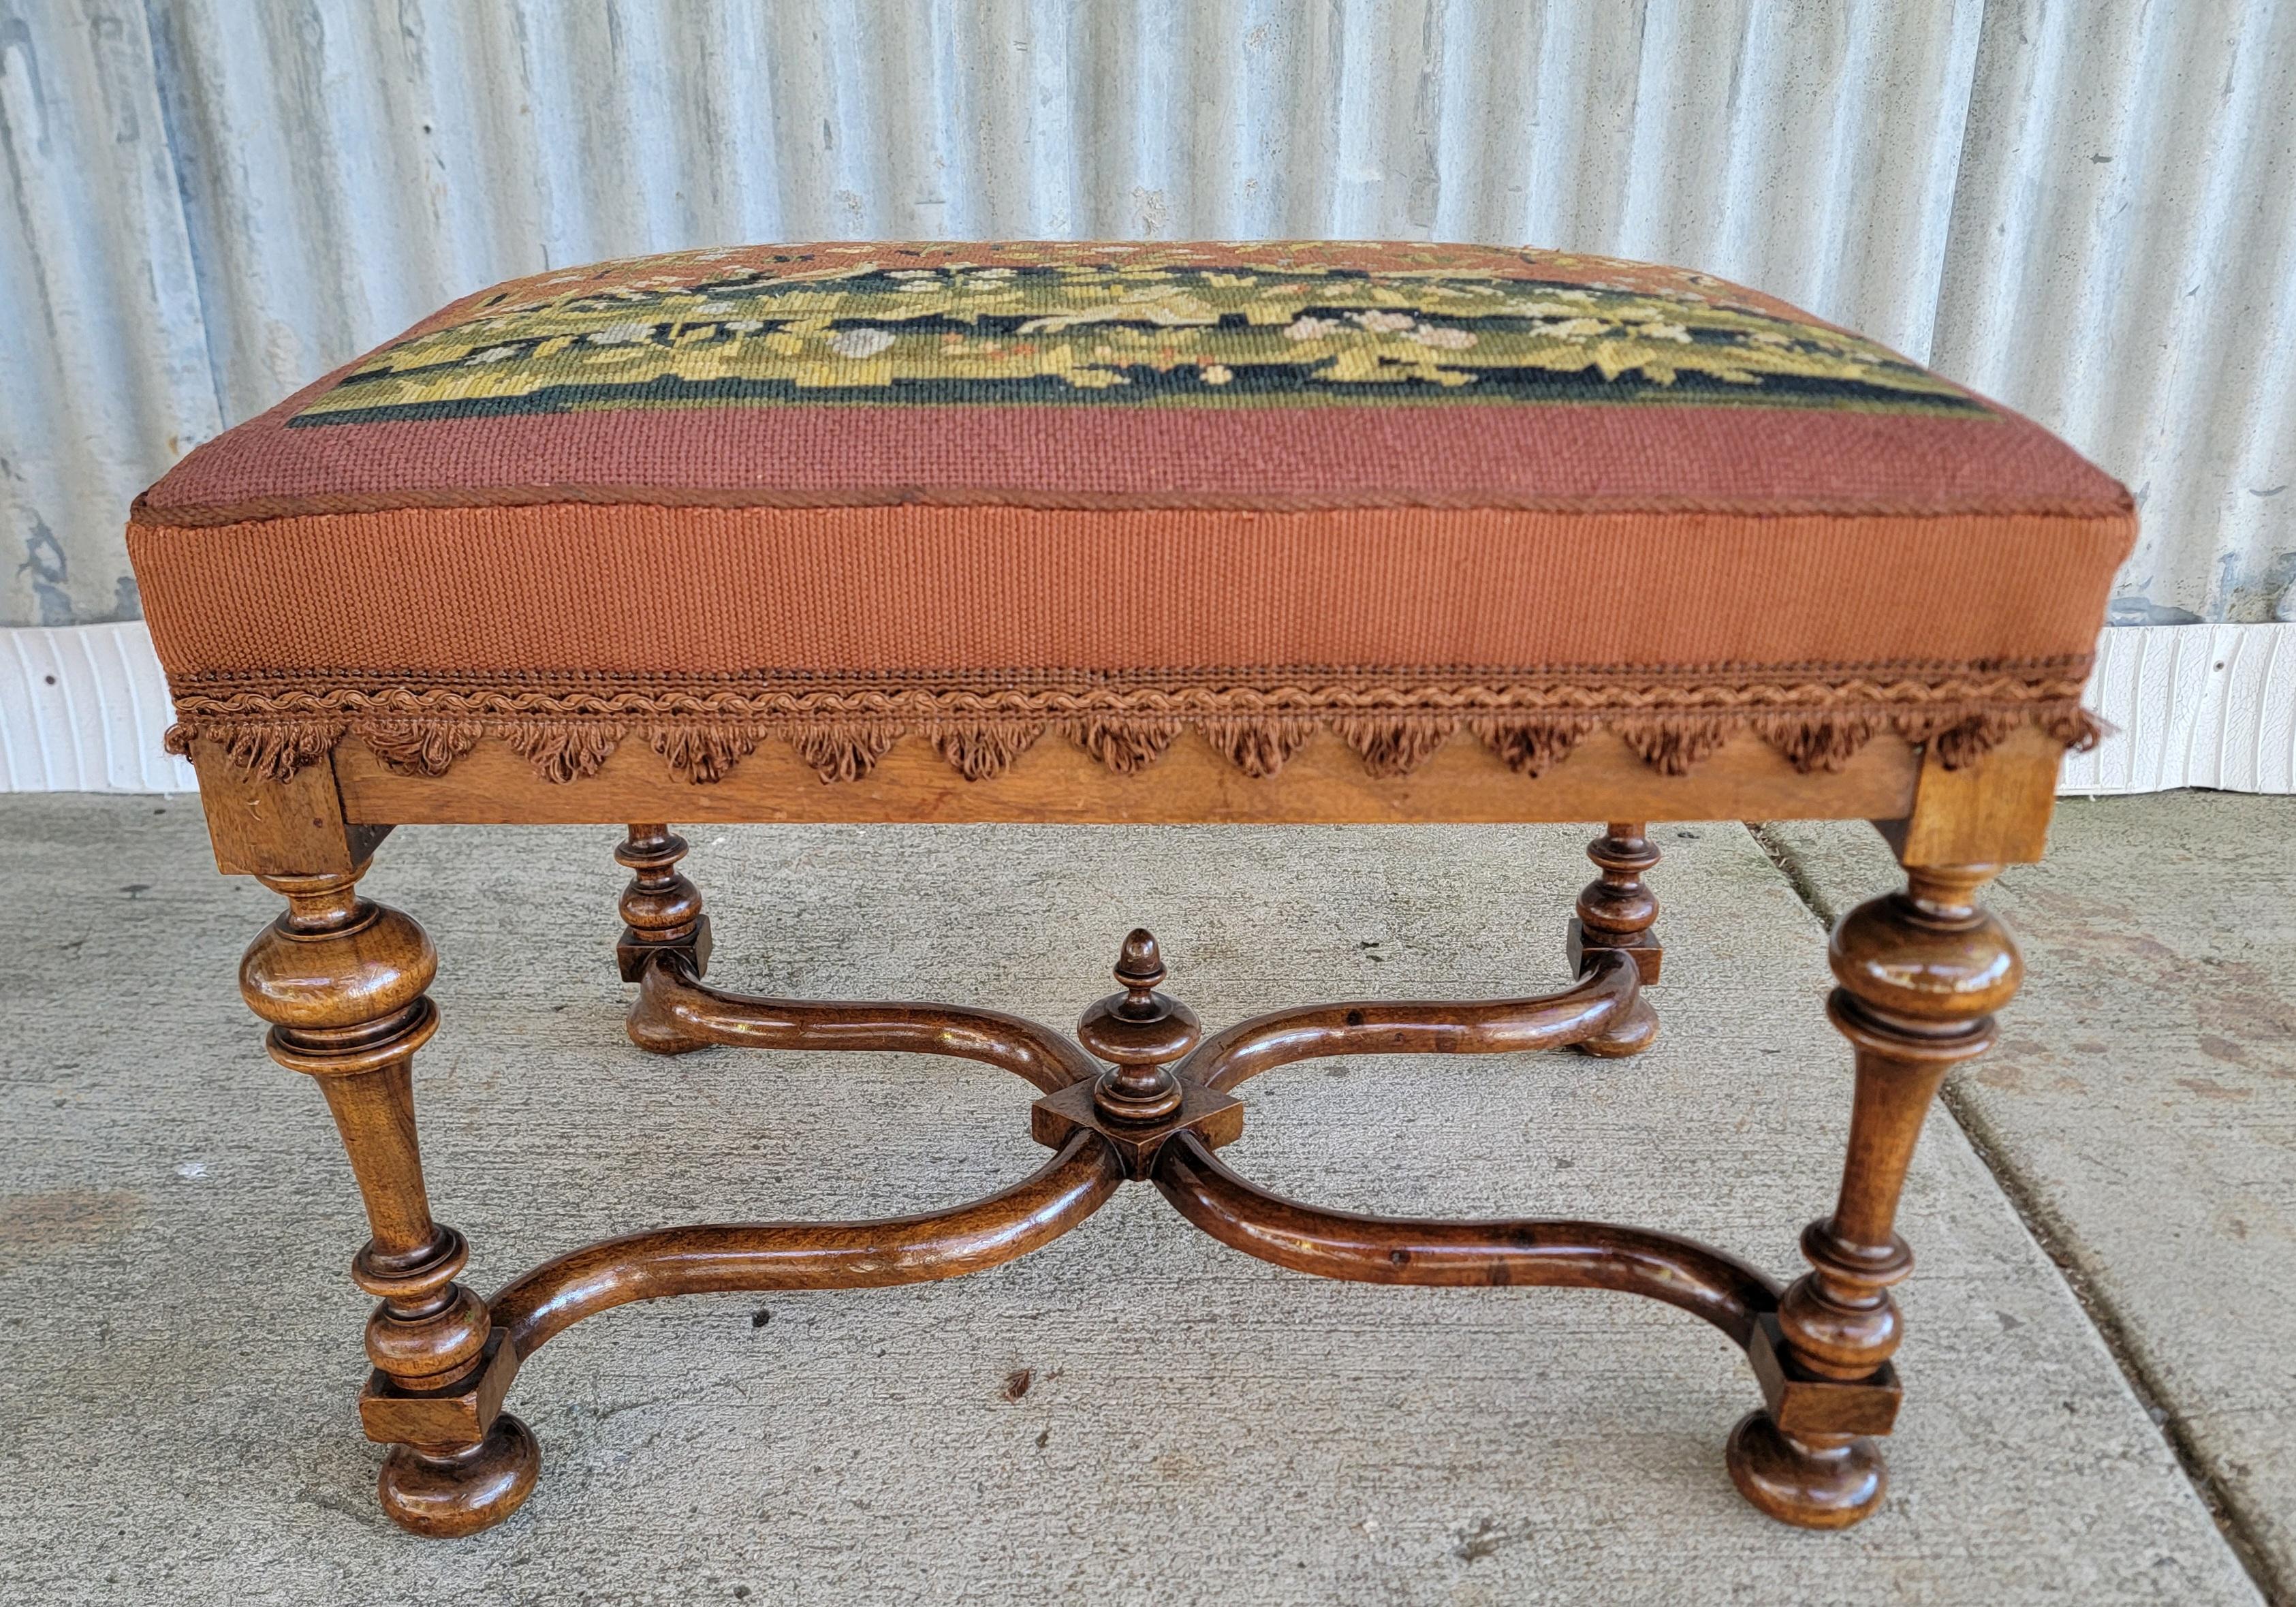 1930's William & Mary style footstool. Period hand needlepoint cover with birds and floral detail. Refinished base with excellent craftsmanship and detail to upholstery. Measures 18 inches deep, 24 inches wide.